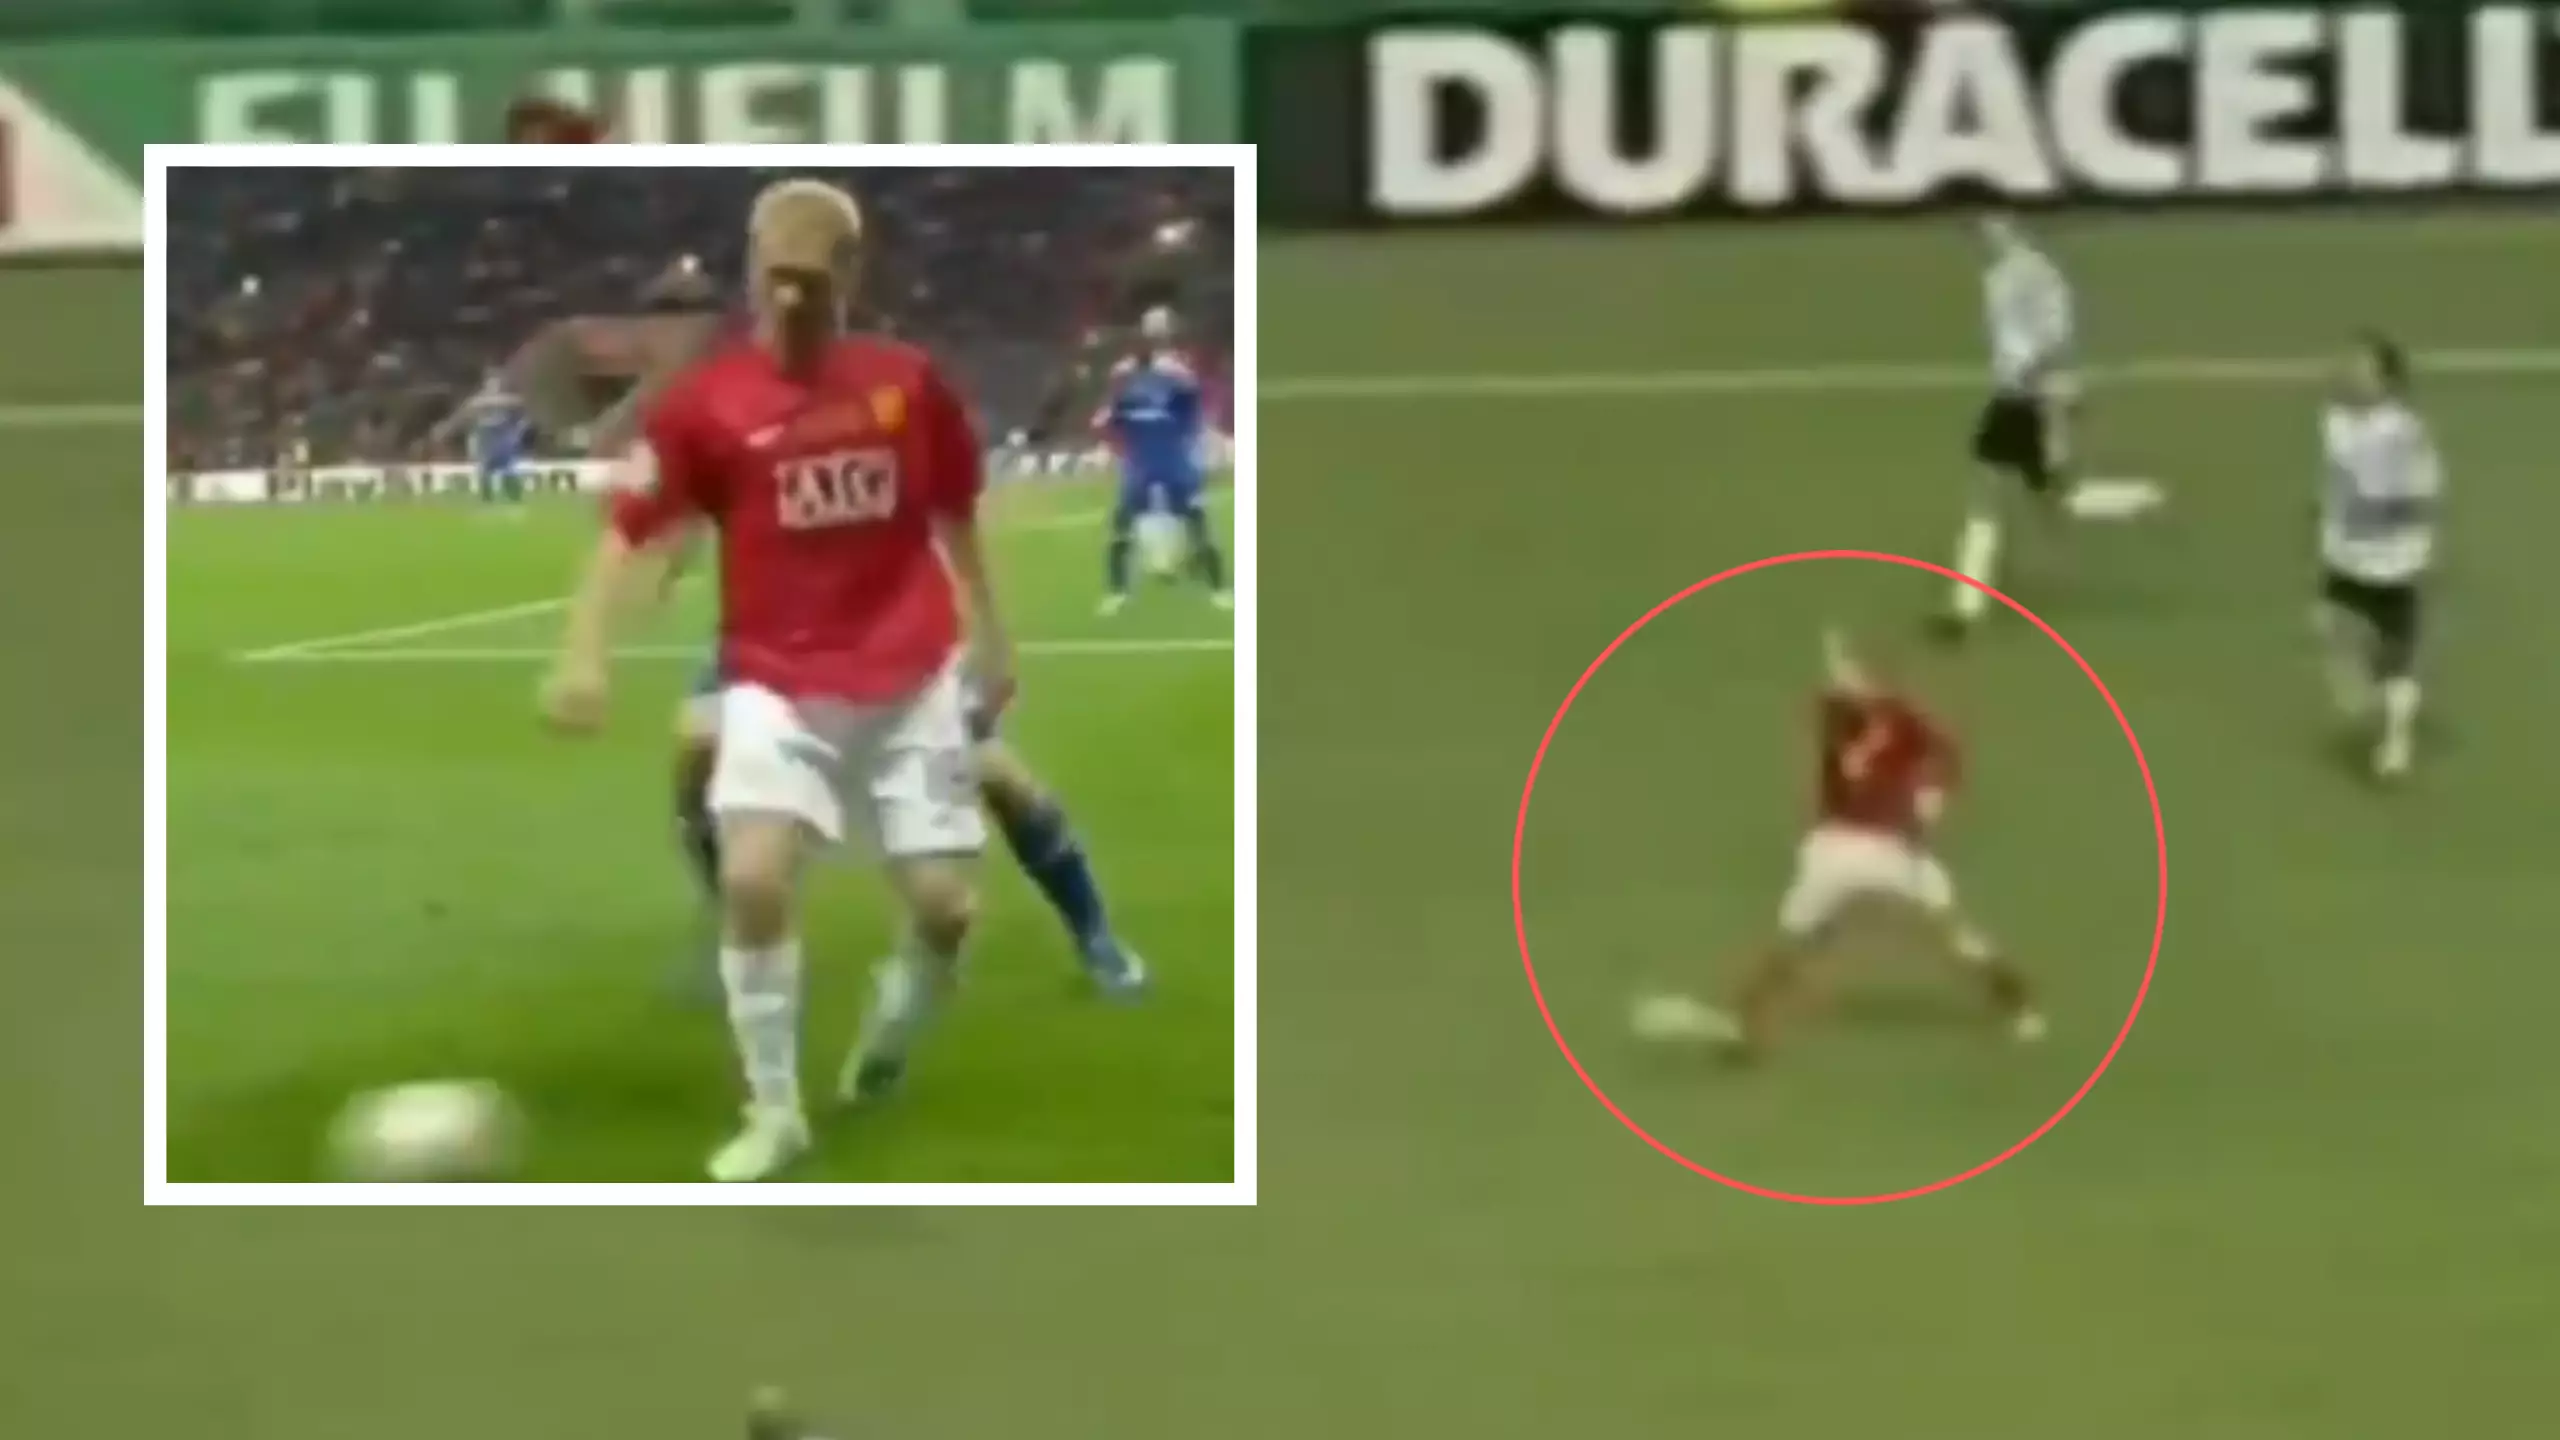 Video Of Paul Scholes' Superb Outside The Foot Passing Technique Is A Joy To Watch